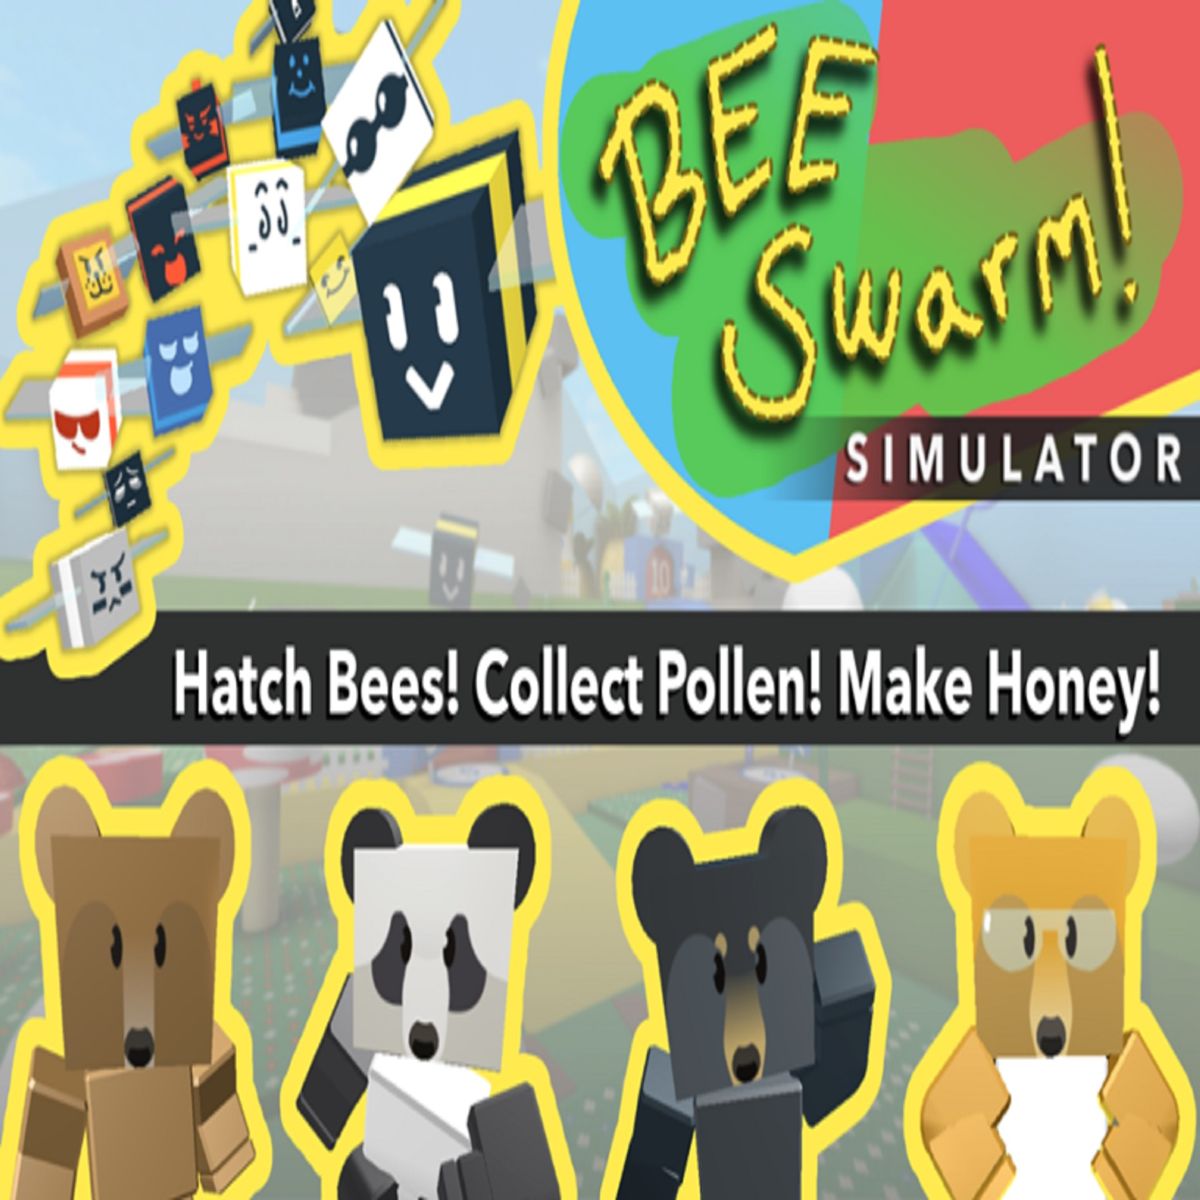 NEW* ALL WORKING CODES FOR Bee Swarm Simulator IN JUNE 2023